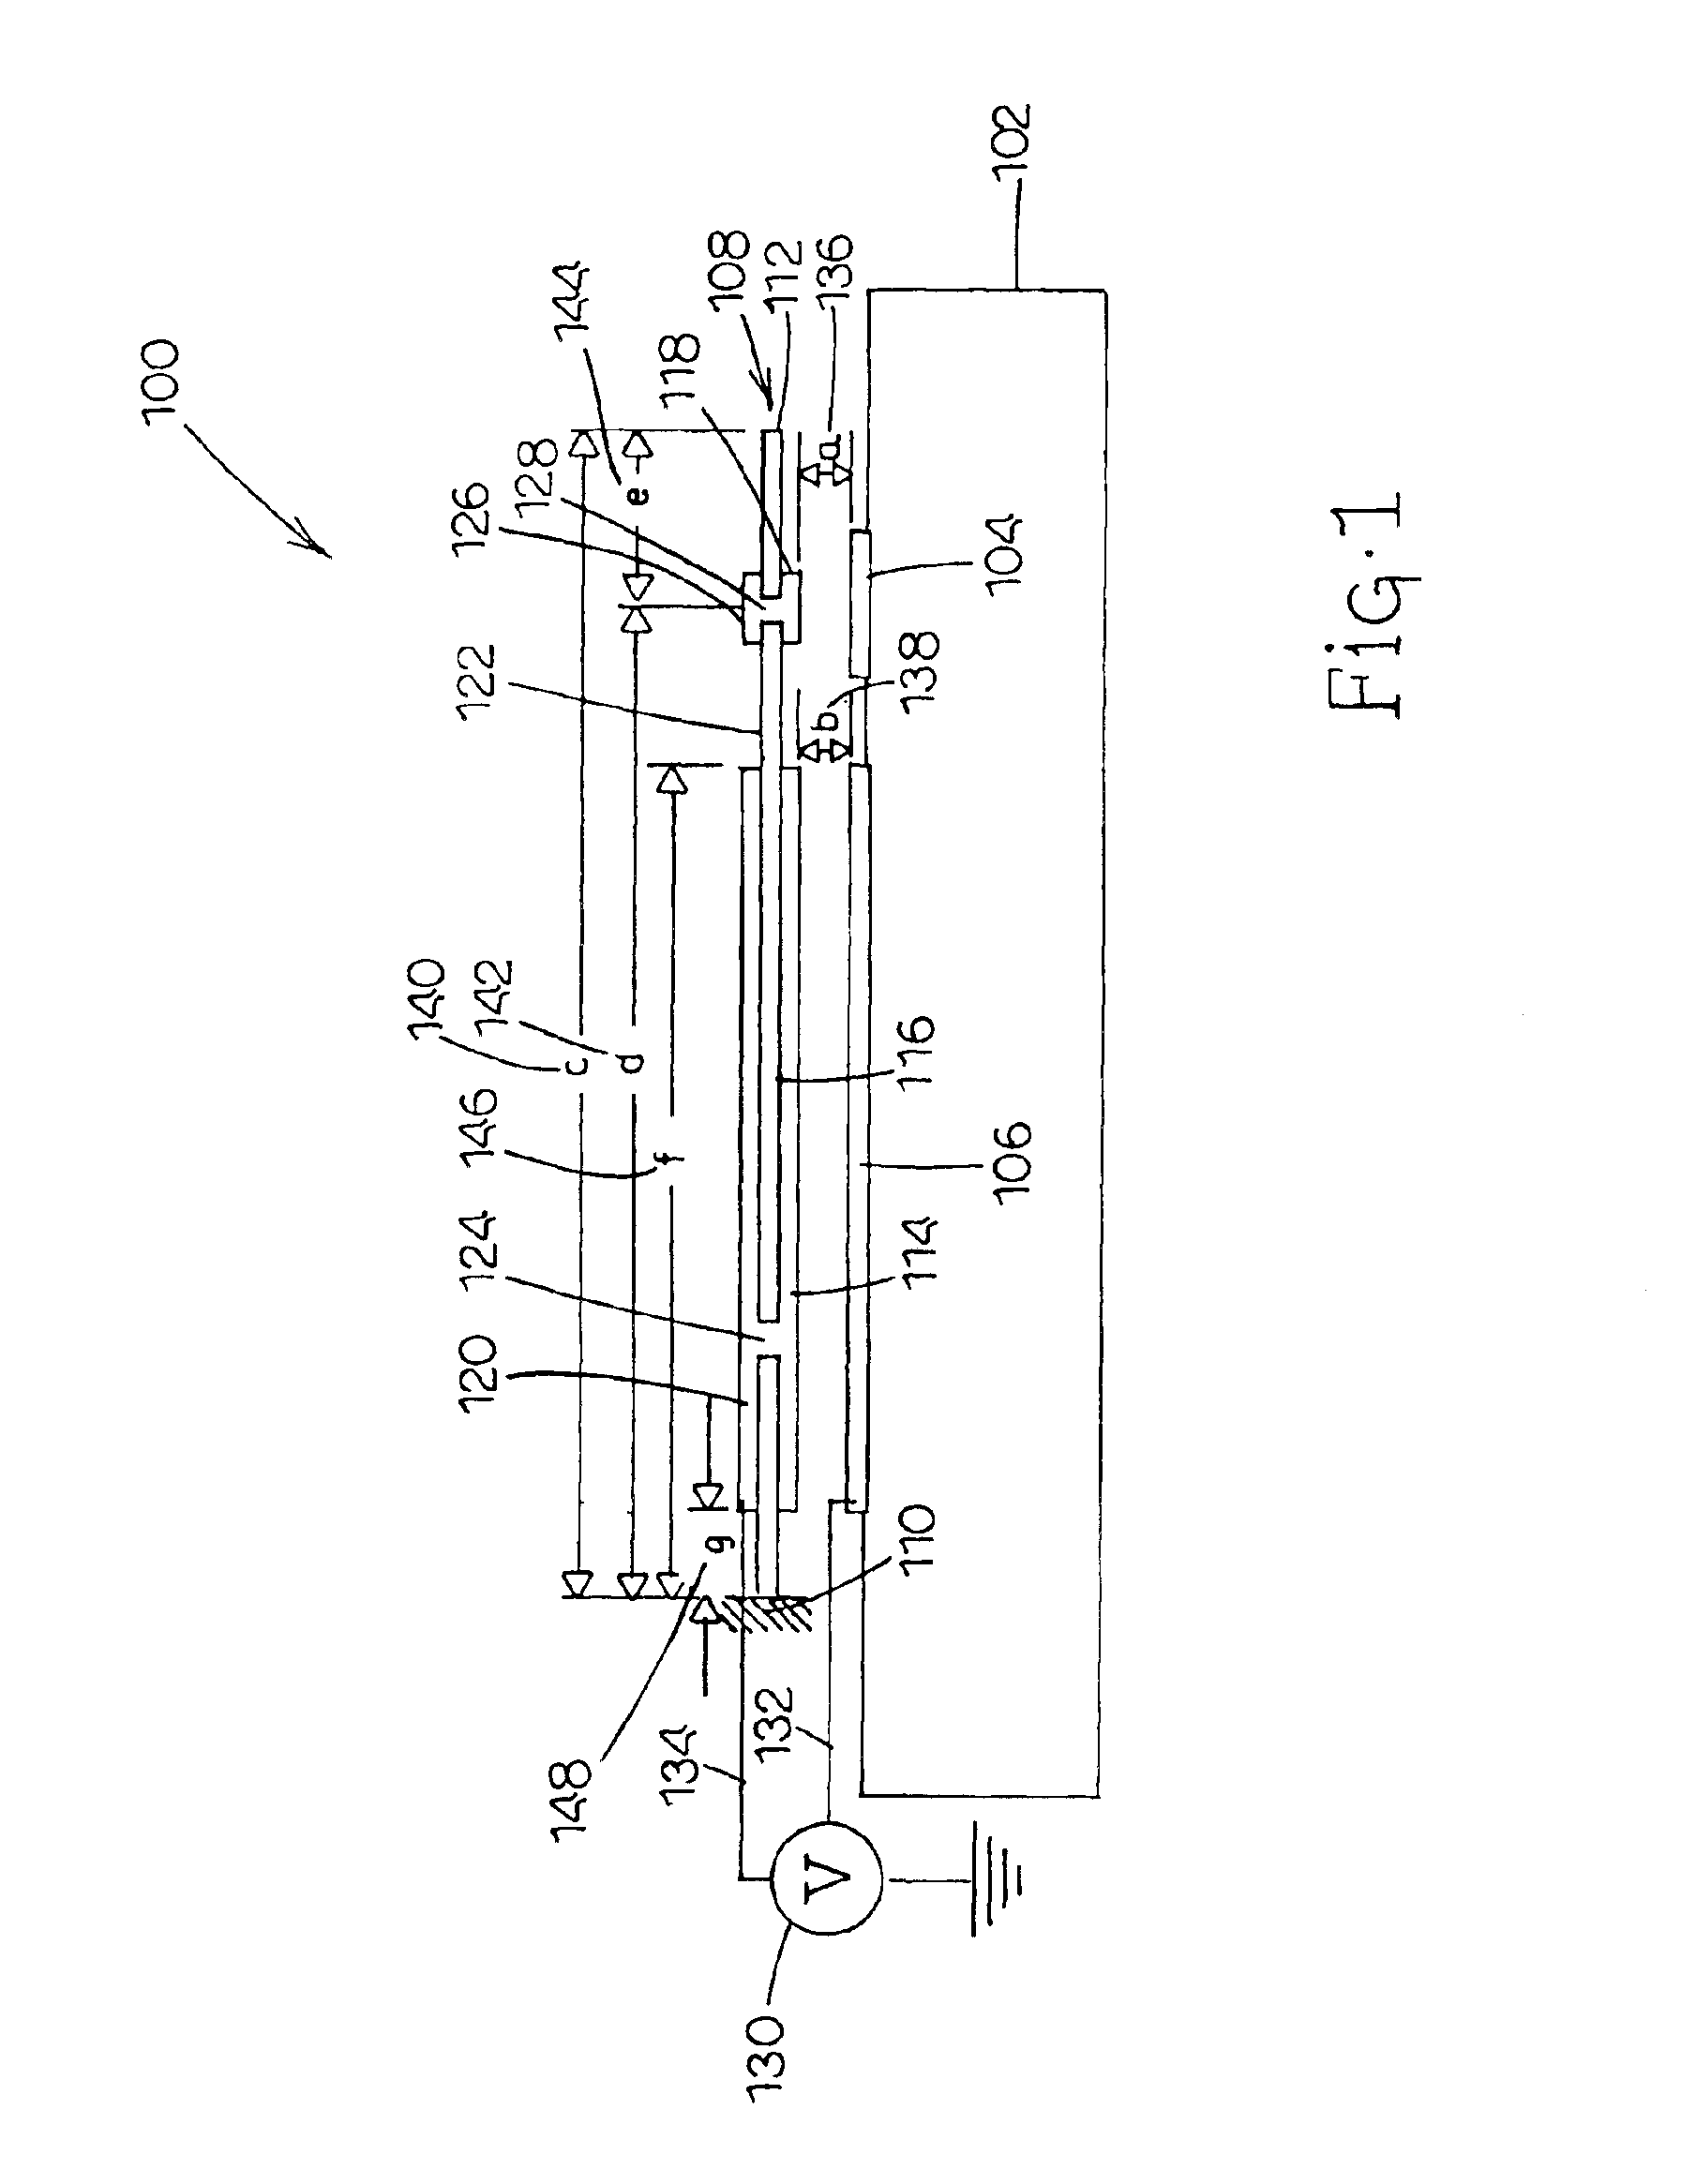 MEMS device having a trilayered beam and related methods